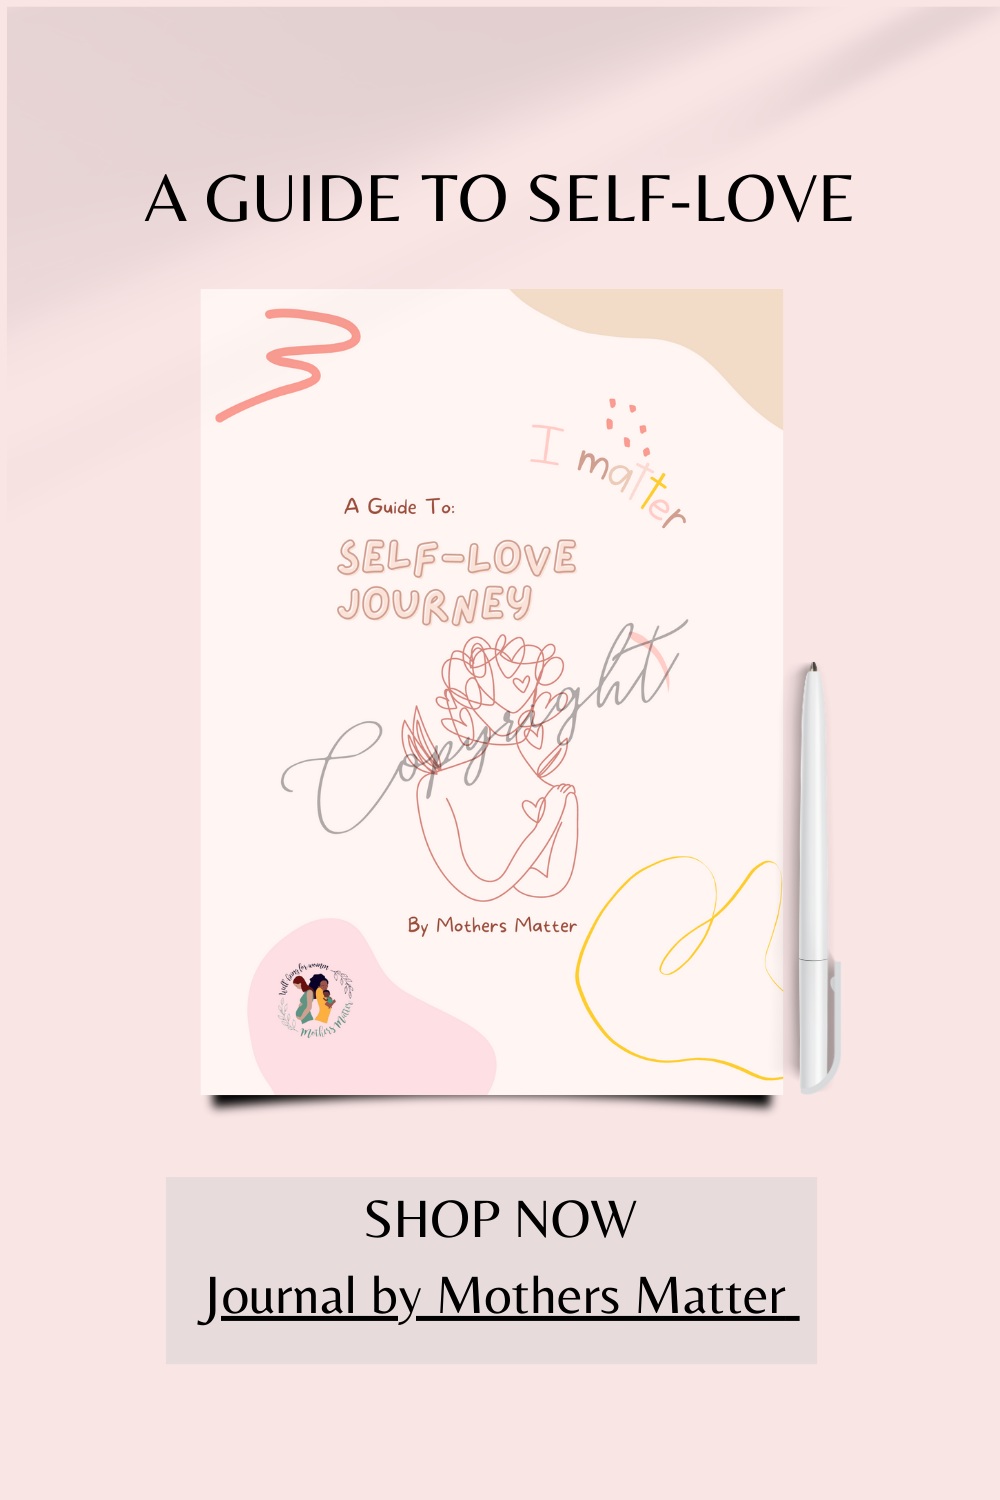 A Guide To Self-Love Journal A5 booklet